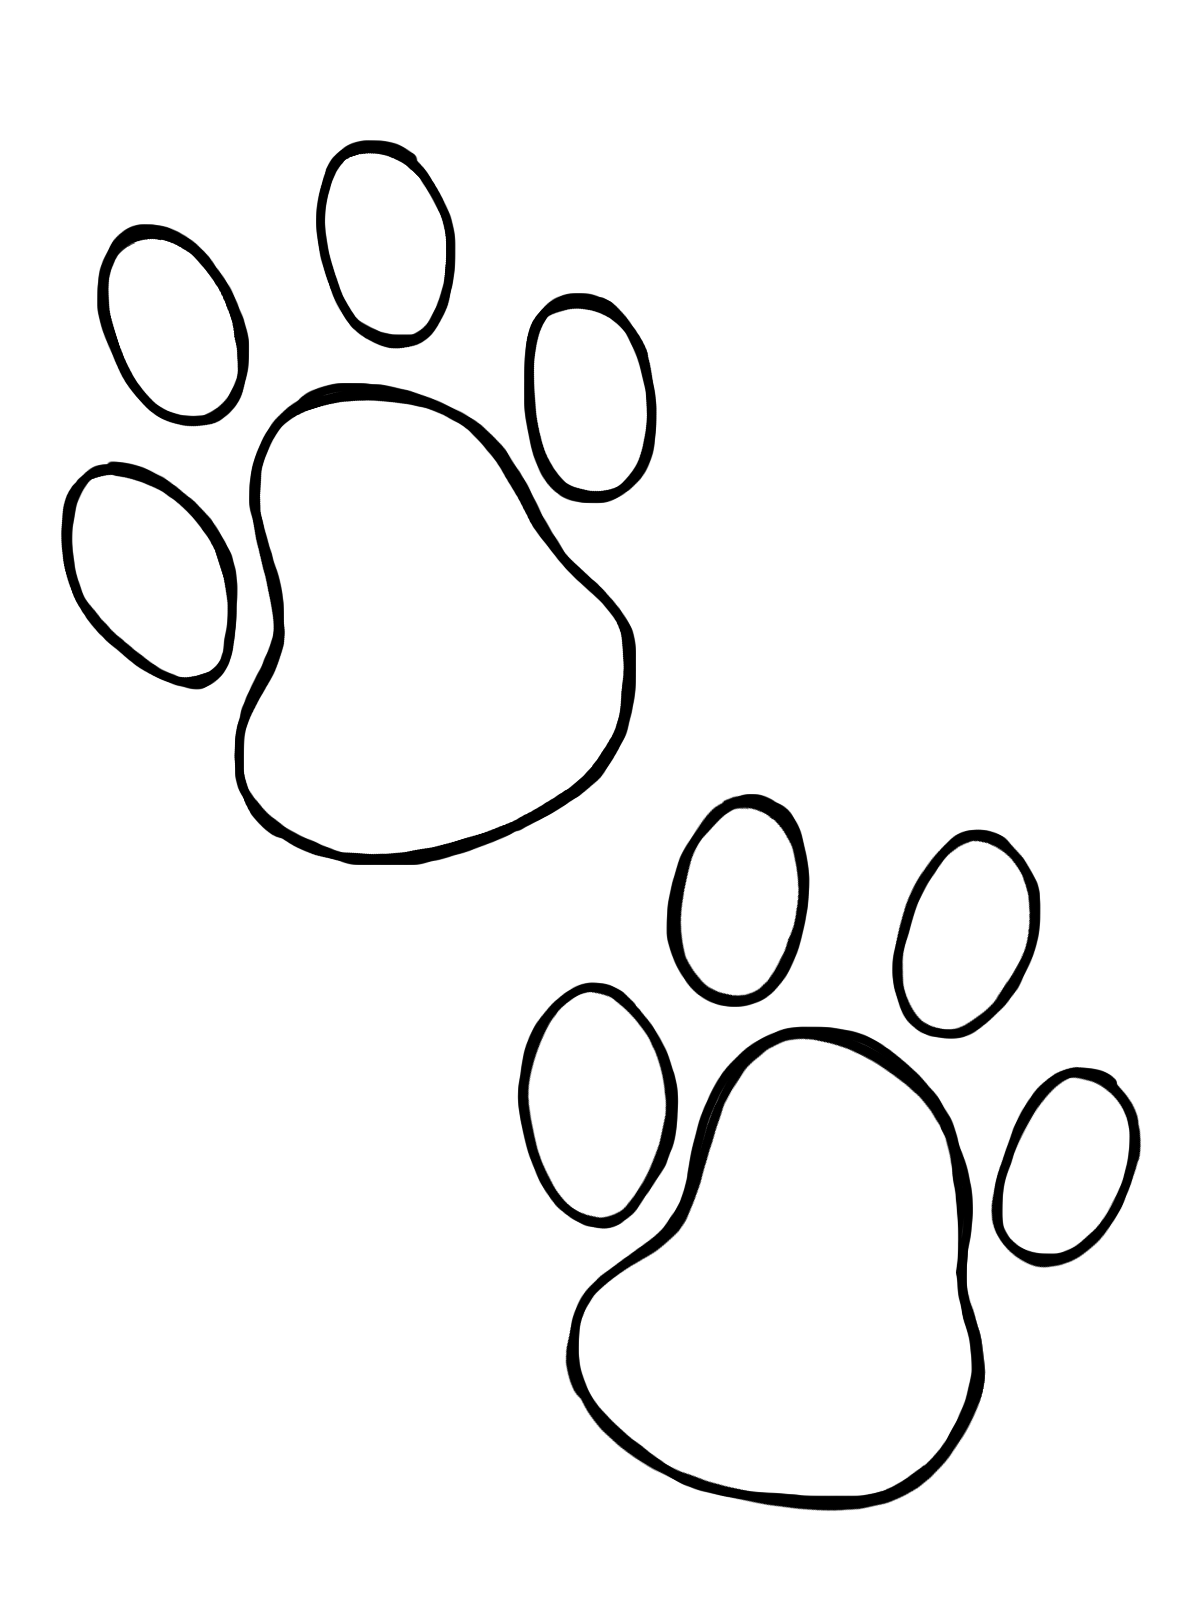 Clip Art by Carrie Teaching First: Pets Doodles with FREEBIE Paw 